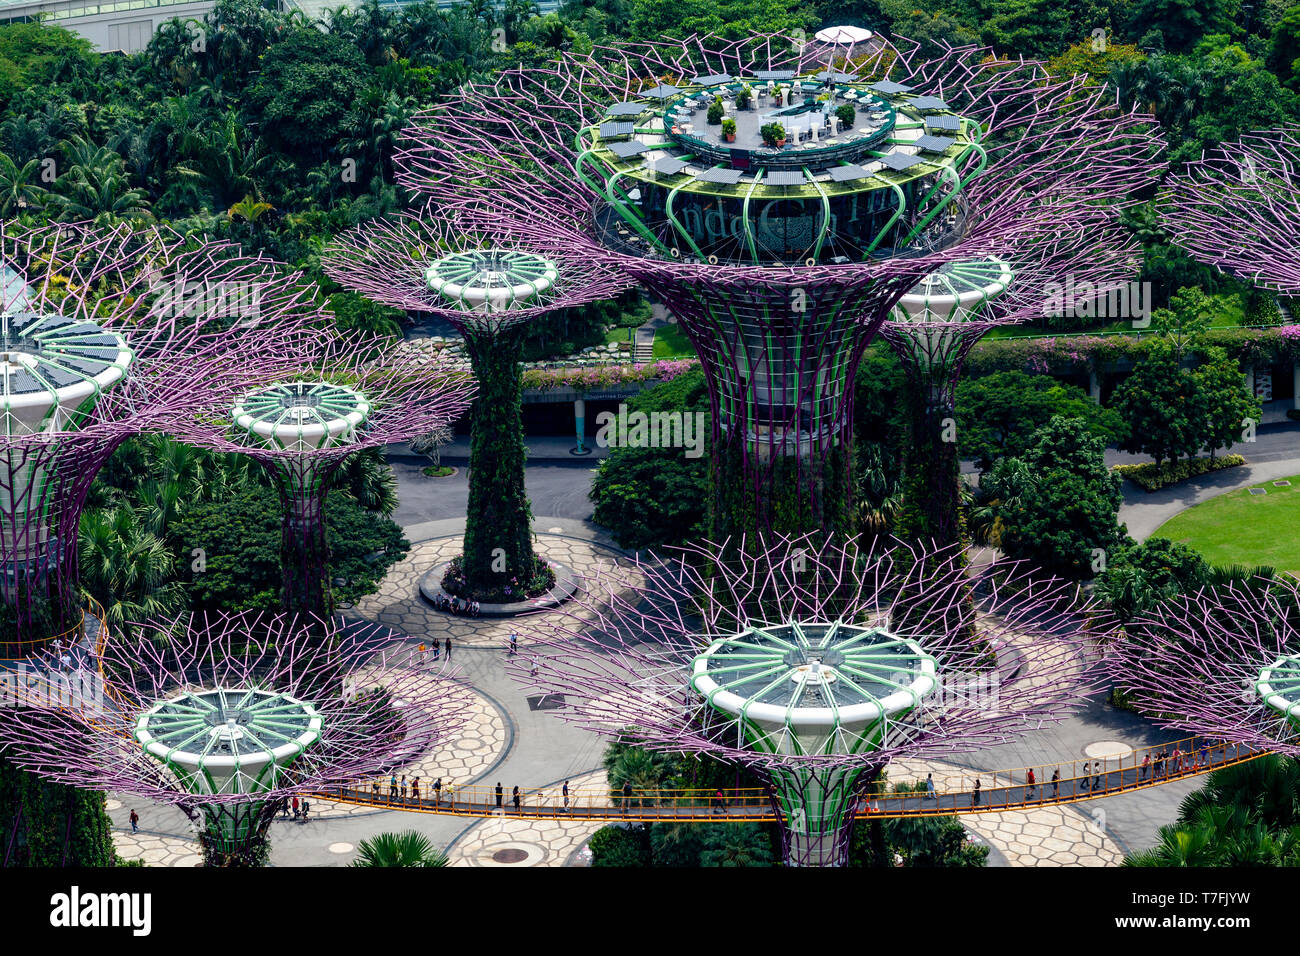 Supertree Grove At The Gardens By The Bay Nature Park, Singapore, South East Asia Stock Photo